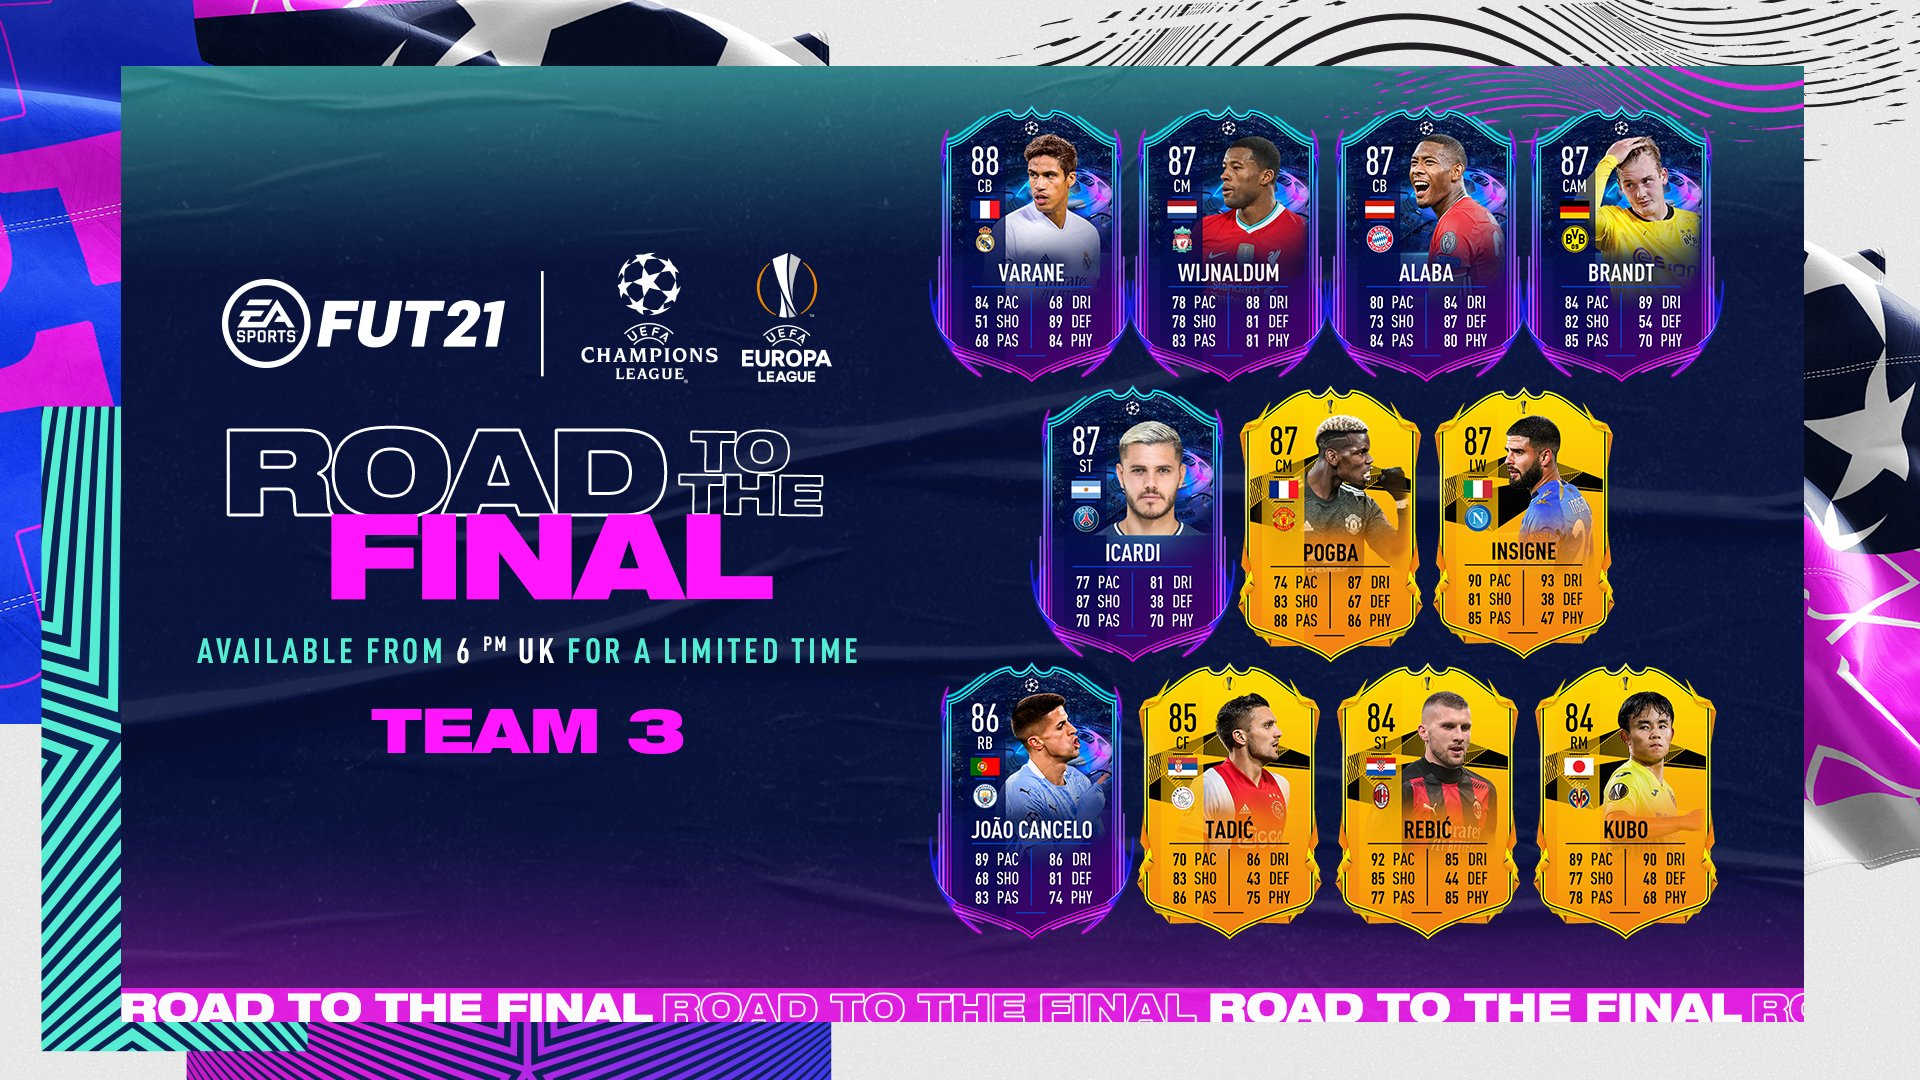 Road to the Final Team 3 FIFA 21